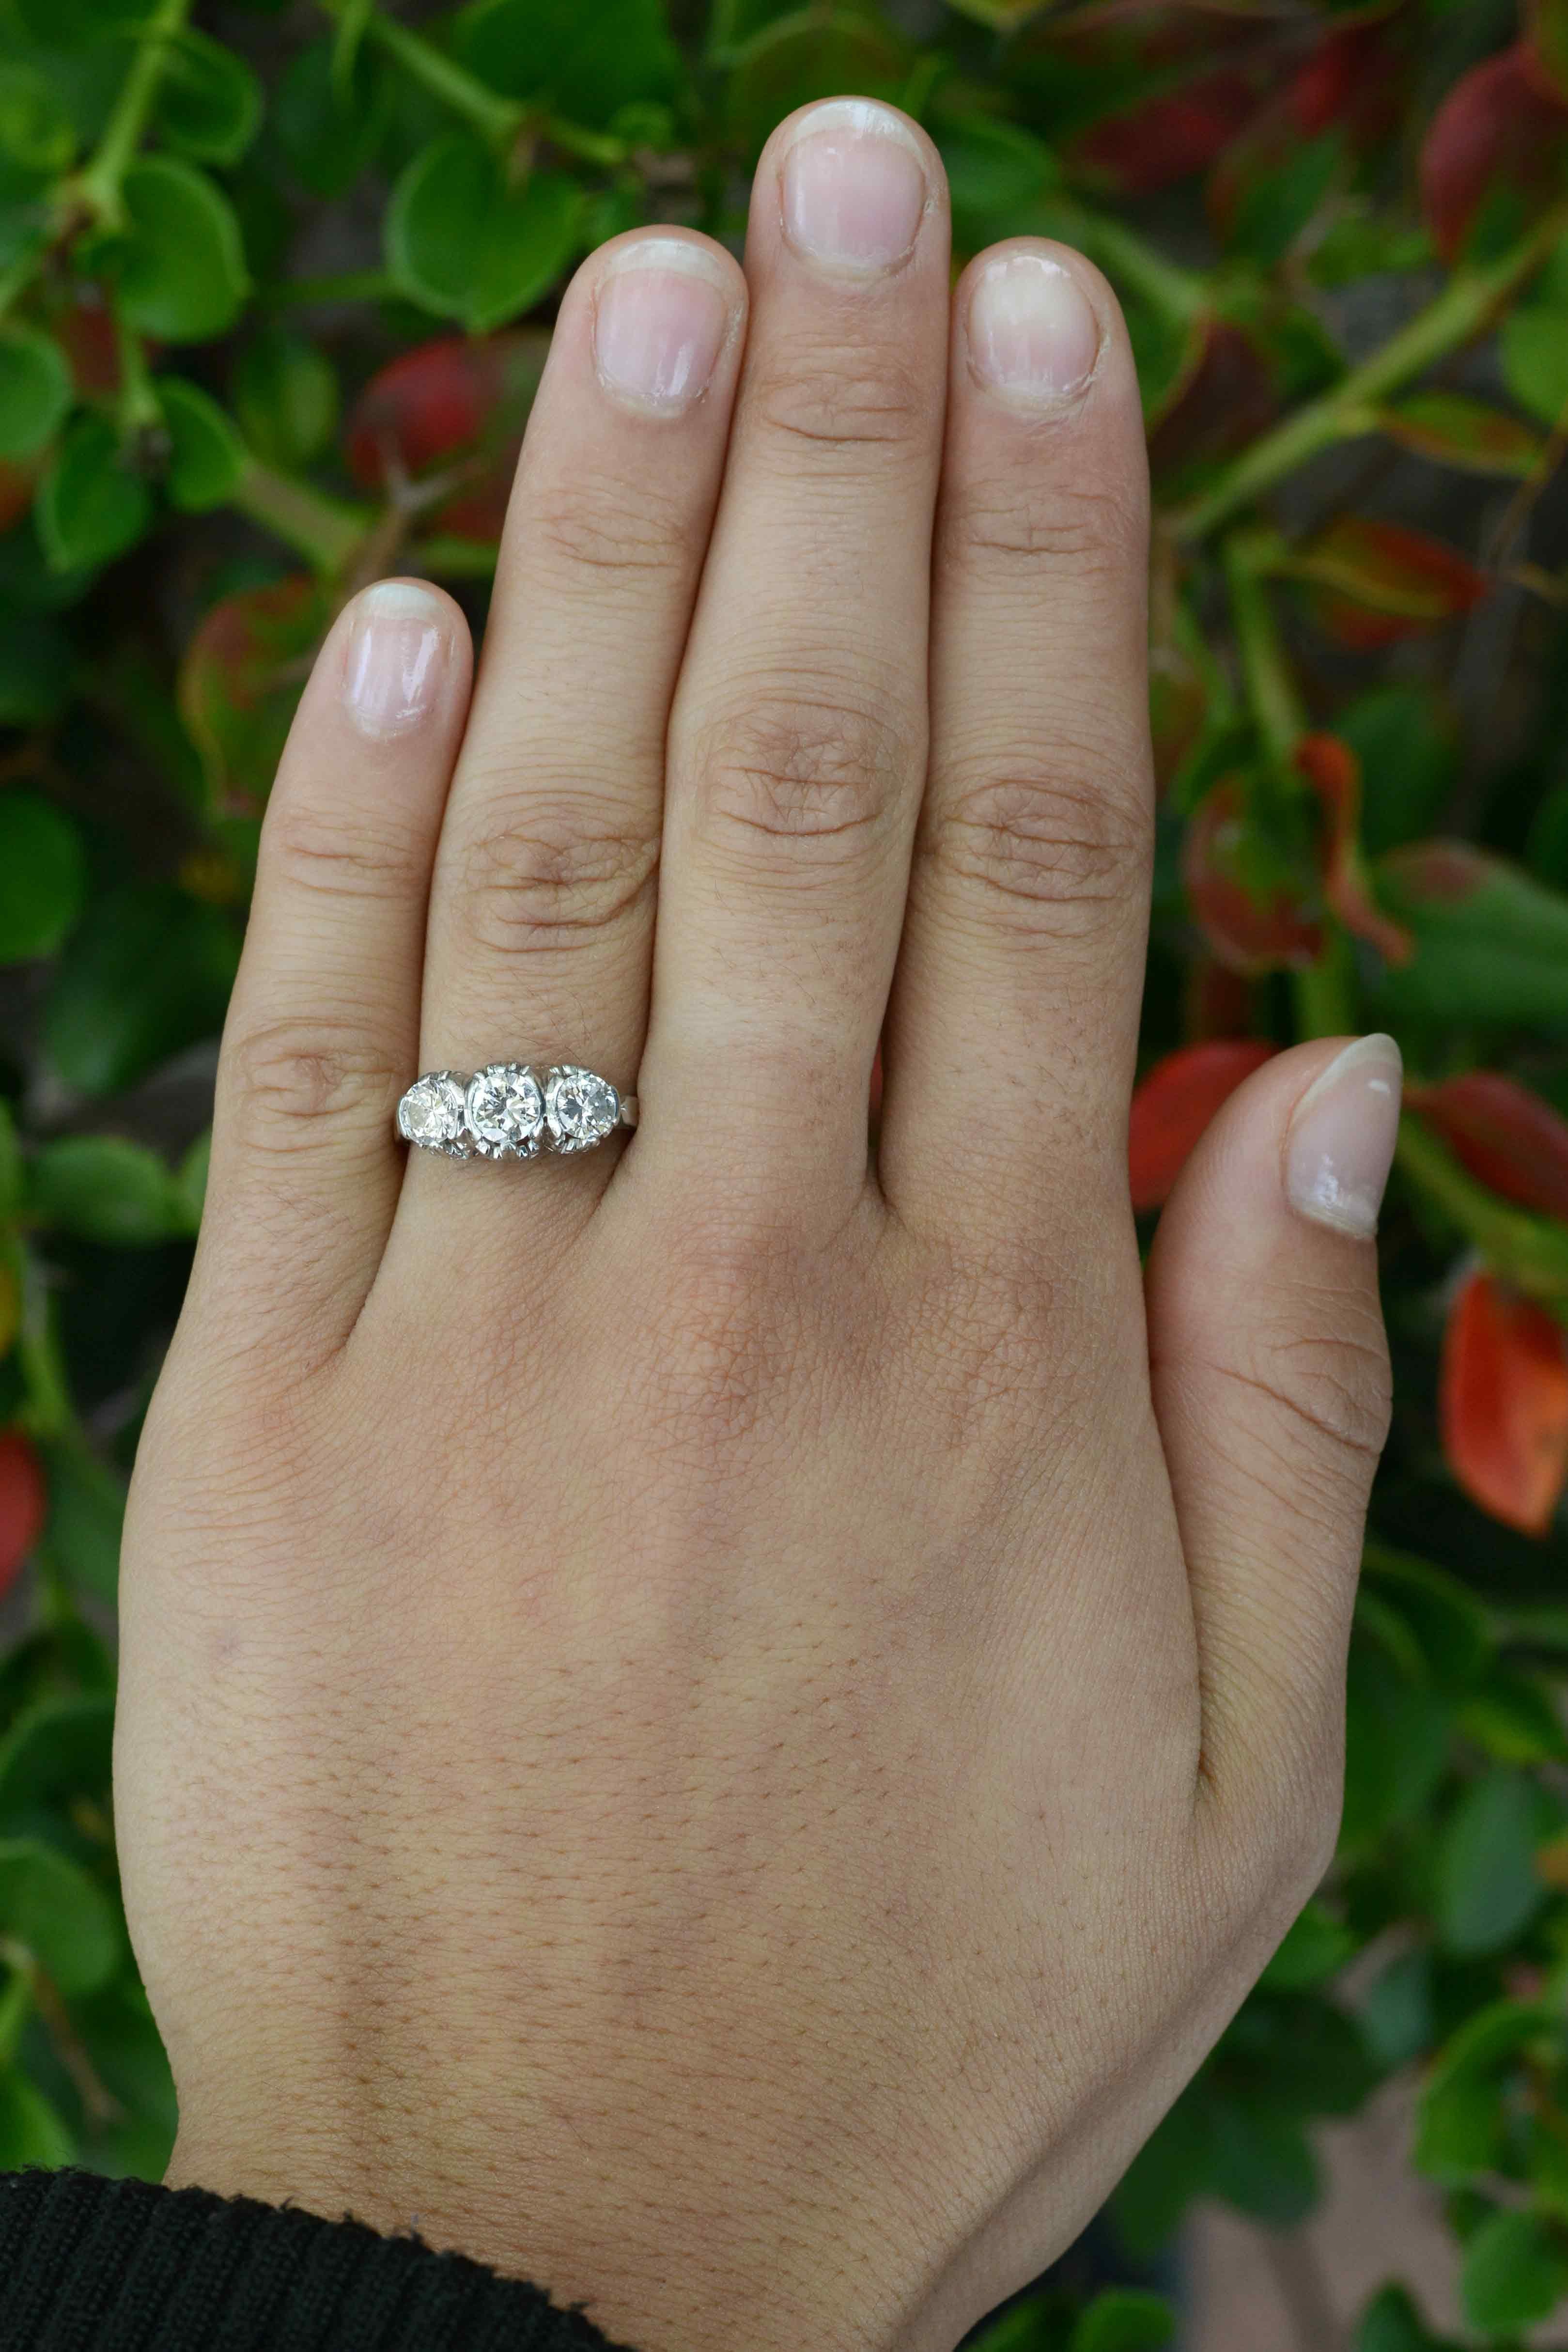 With a dainty fleur de lis crown, this fab, 3 stone Art Deco diamond engagement ring is an enduring classic. The sturdy platinum trinity or trilogy band as it is known, set with a trio of vibrant round diamonds of exceptional clarity and a